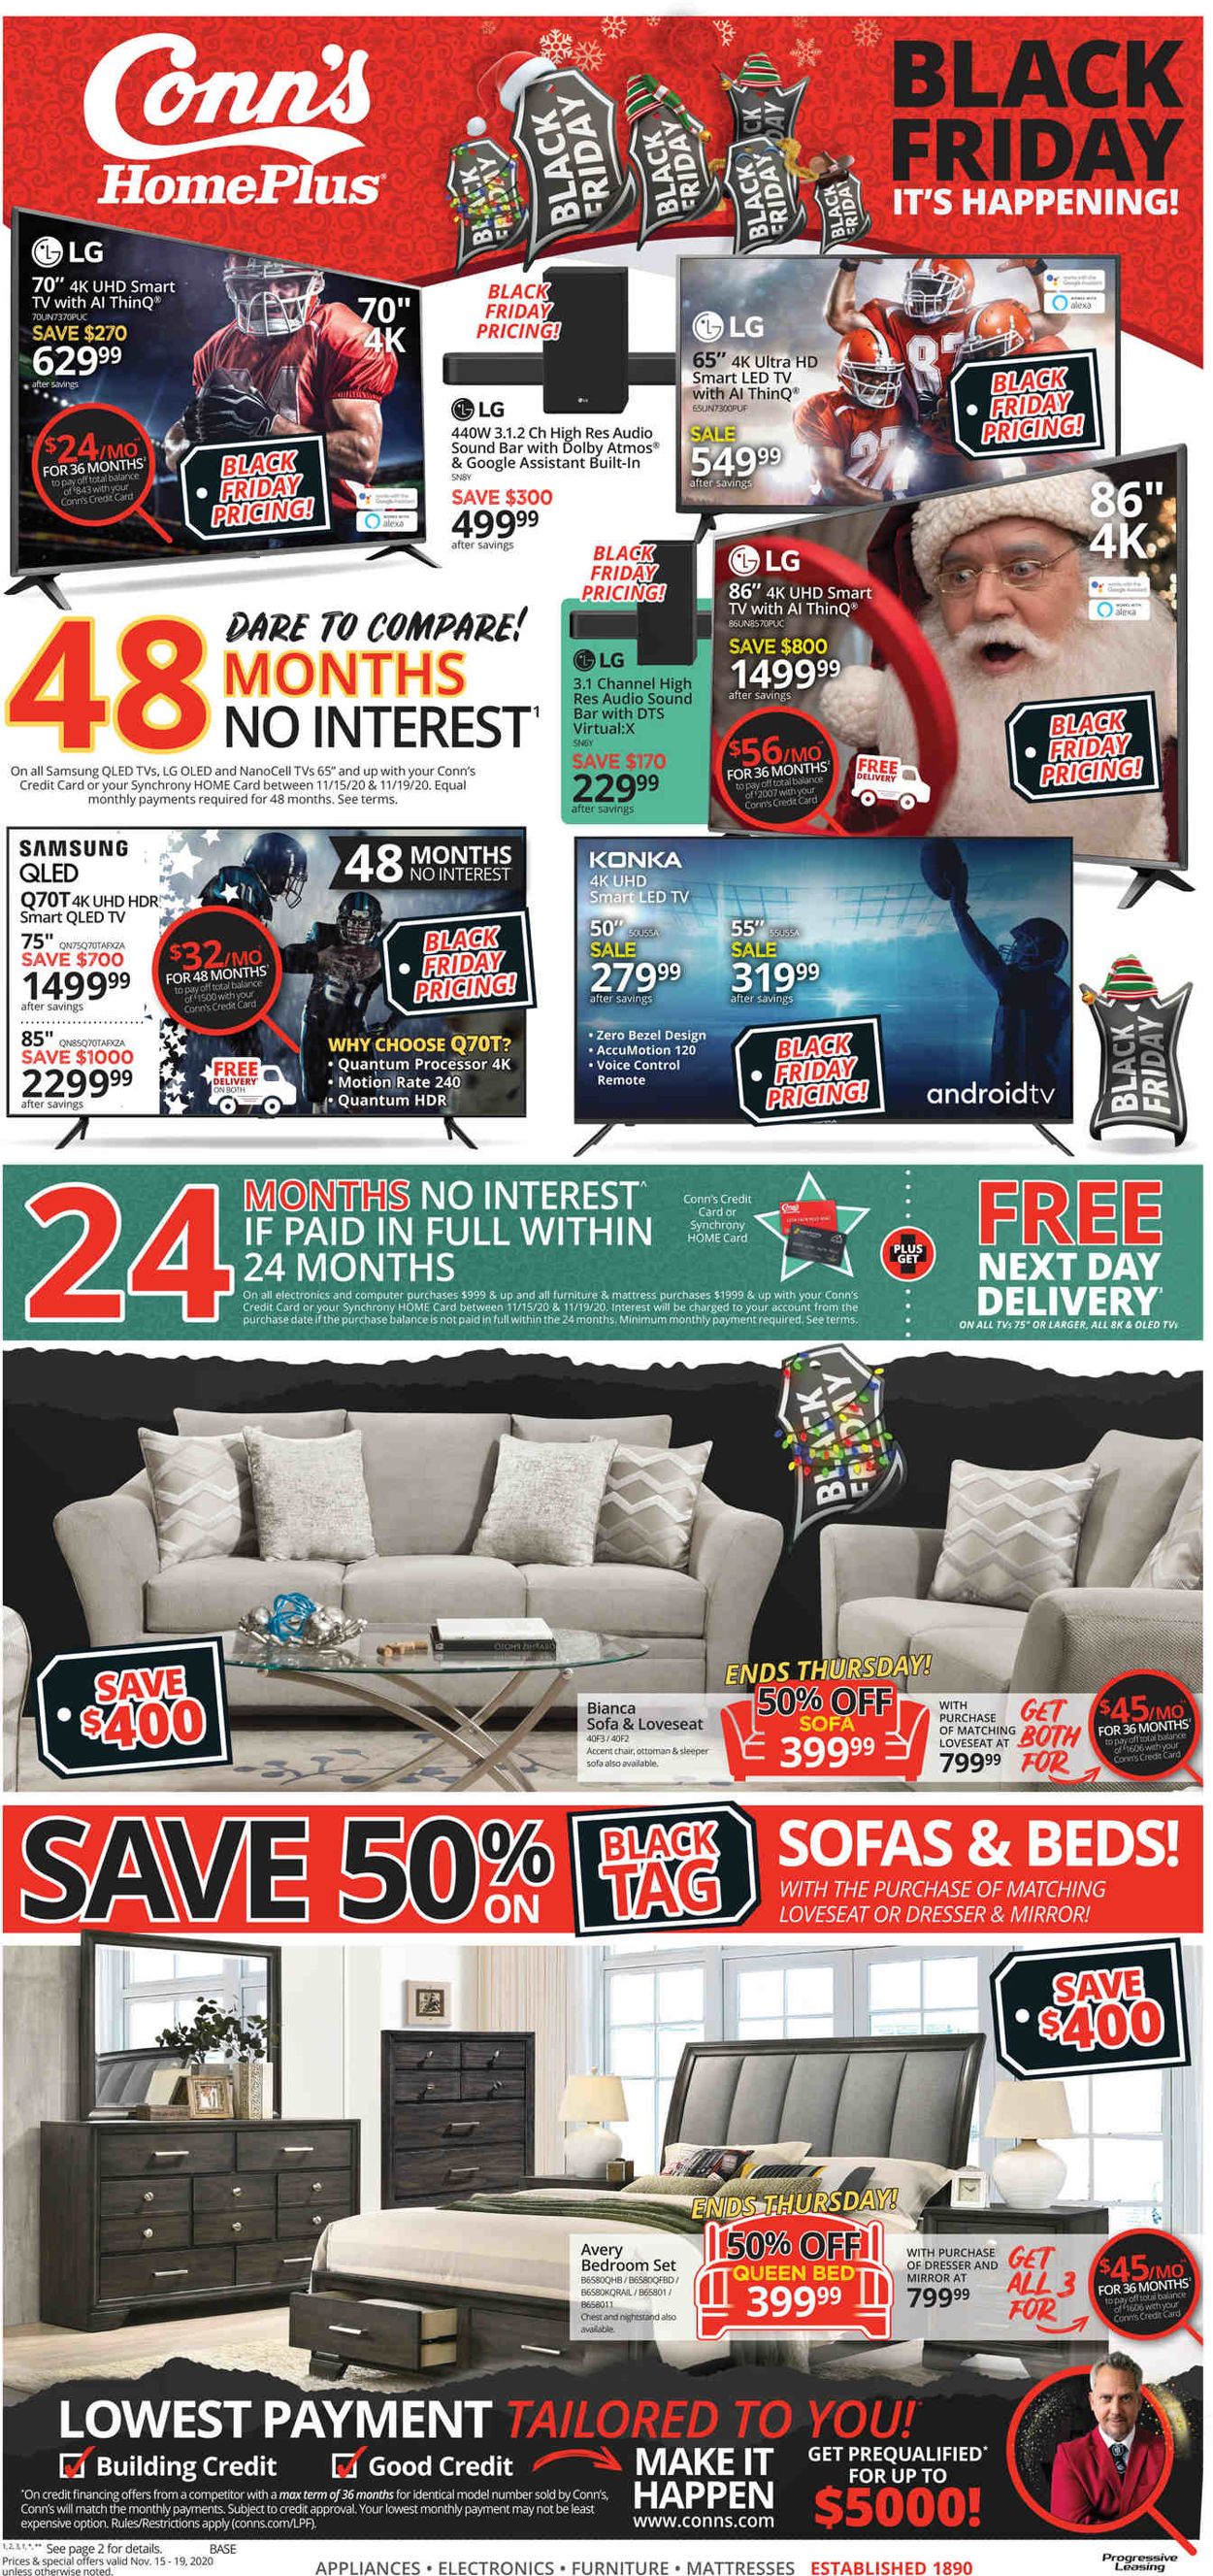 Conn's Home Plus Black Friday 2020 Weekly Ad Circular - valid 11/15-11/19/2020